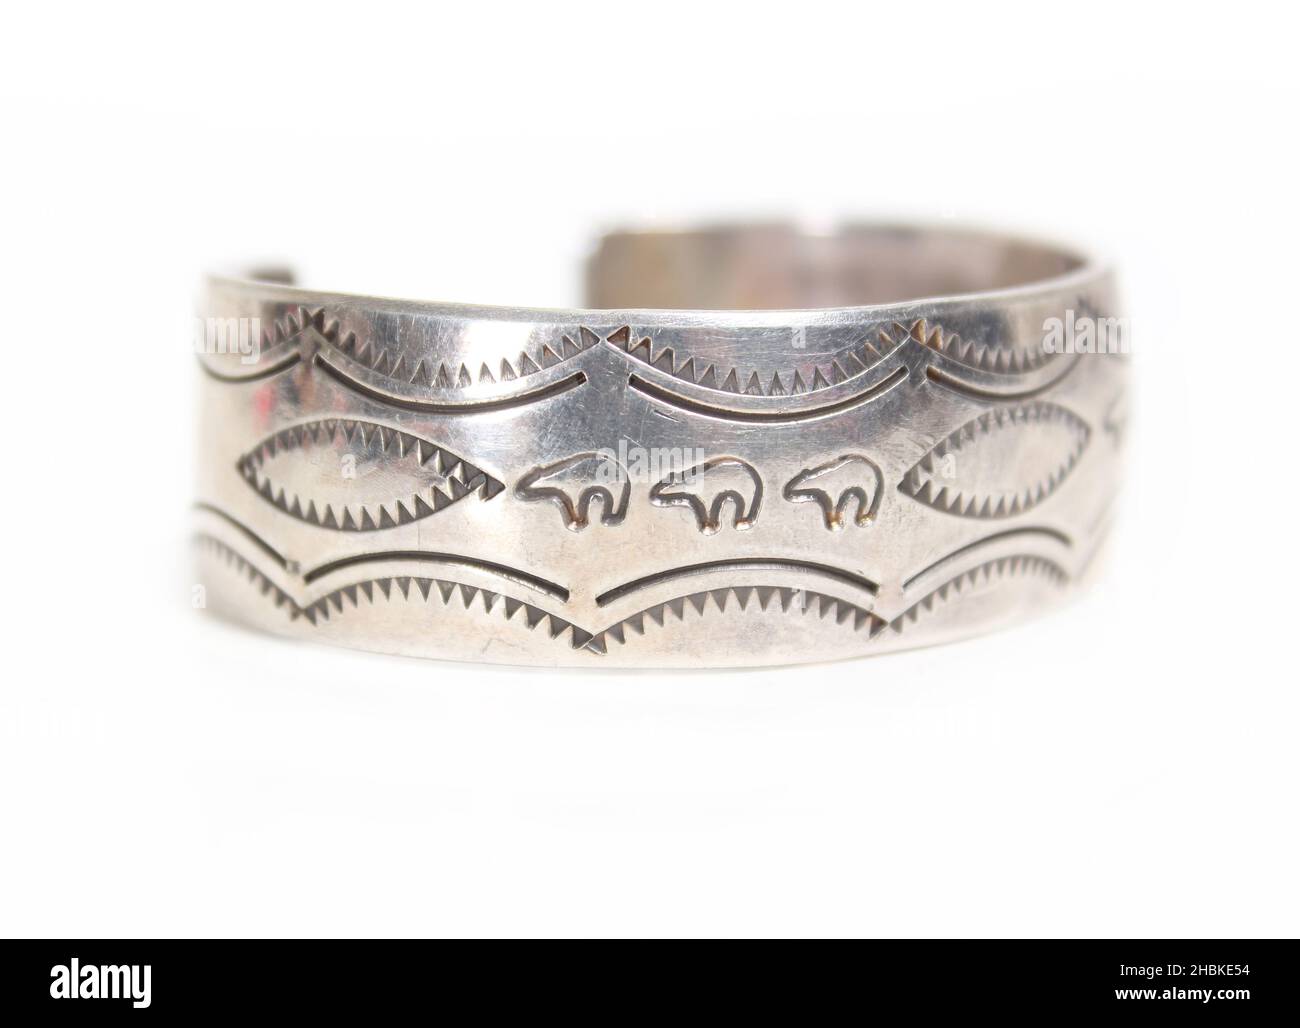 Vintage Native American Sterling Silber Armband Isoliert Stockfoto